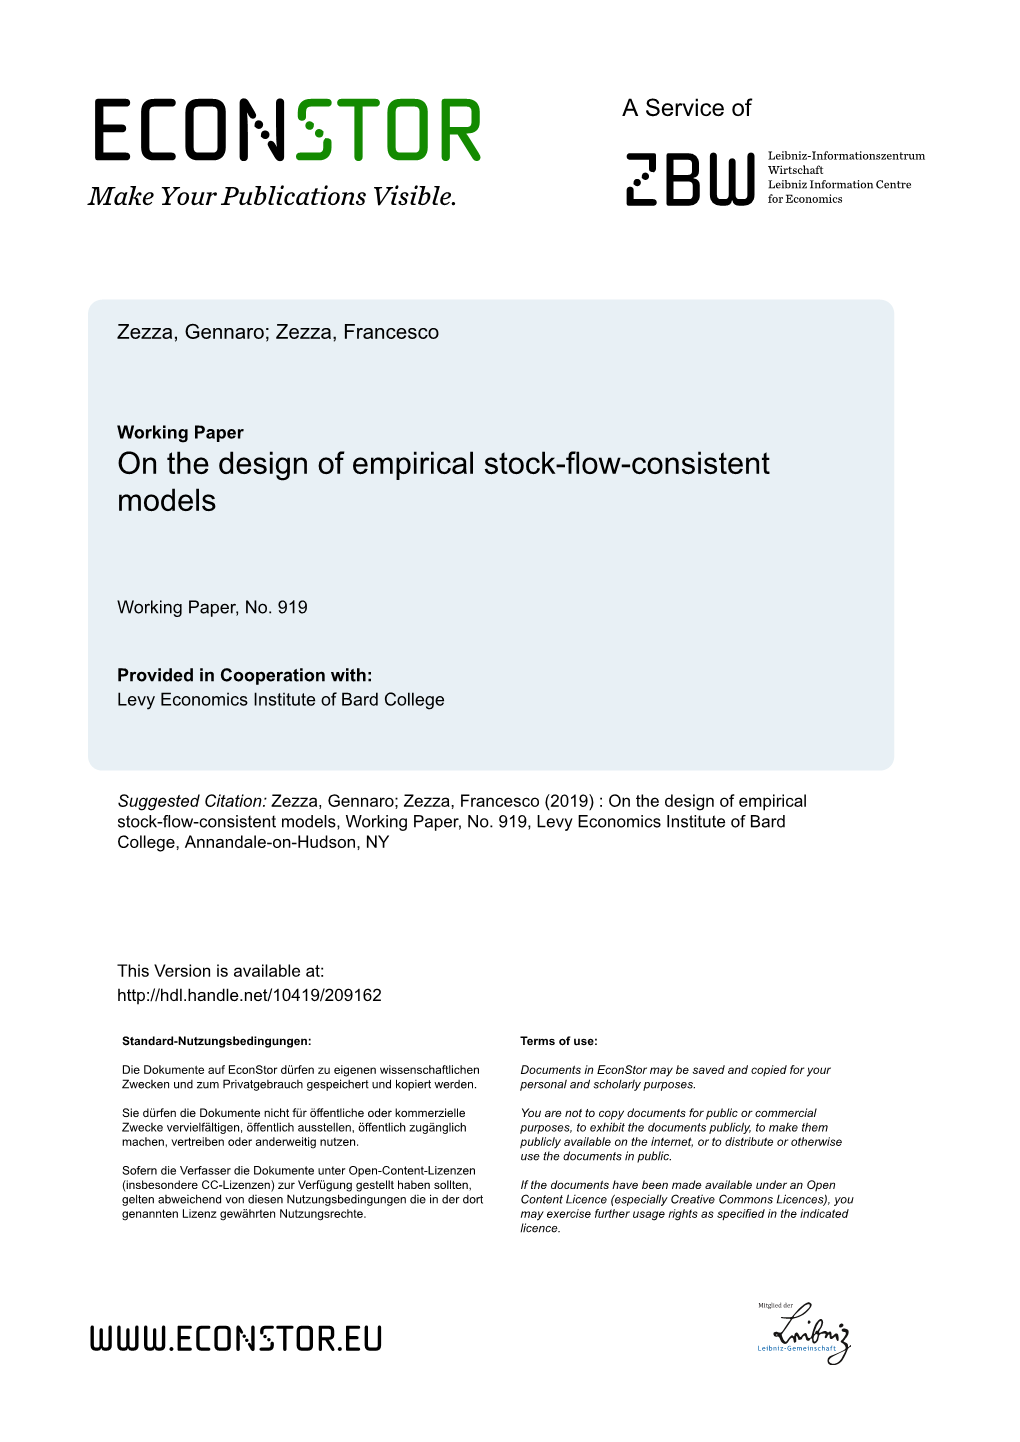 On the Design of Empirical Stock-Flow-Consistent Models